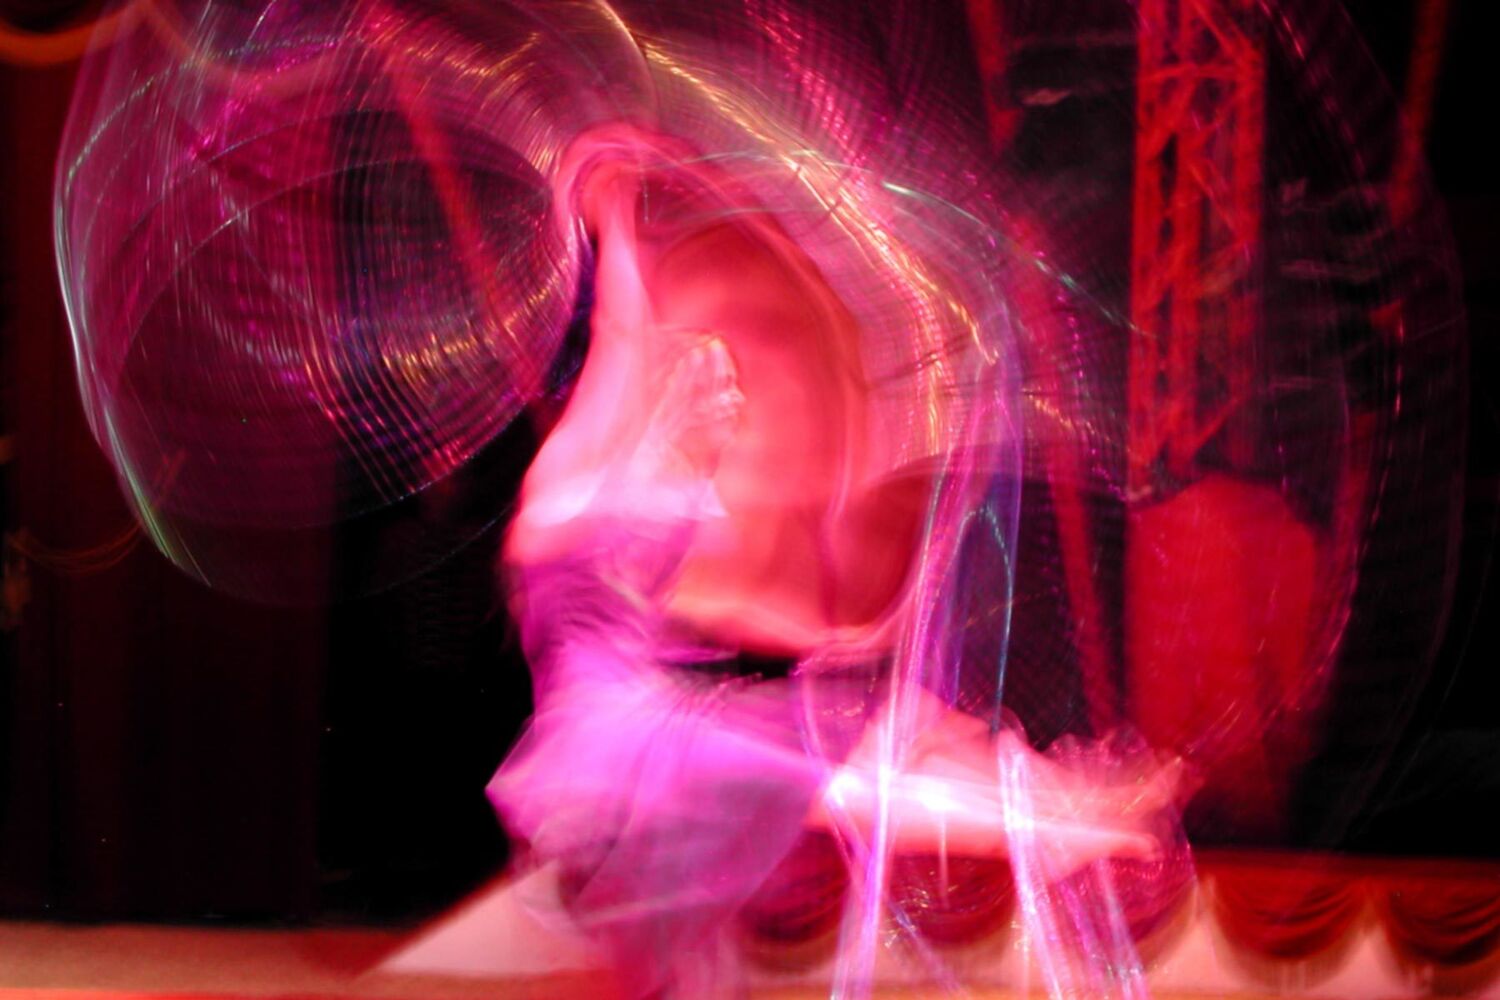 Theatre Performer In Pink Dress Blurred Through Movement